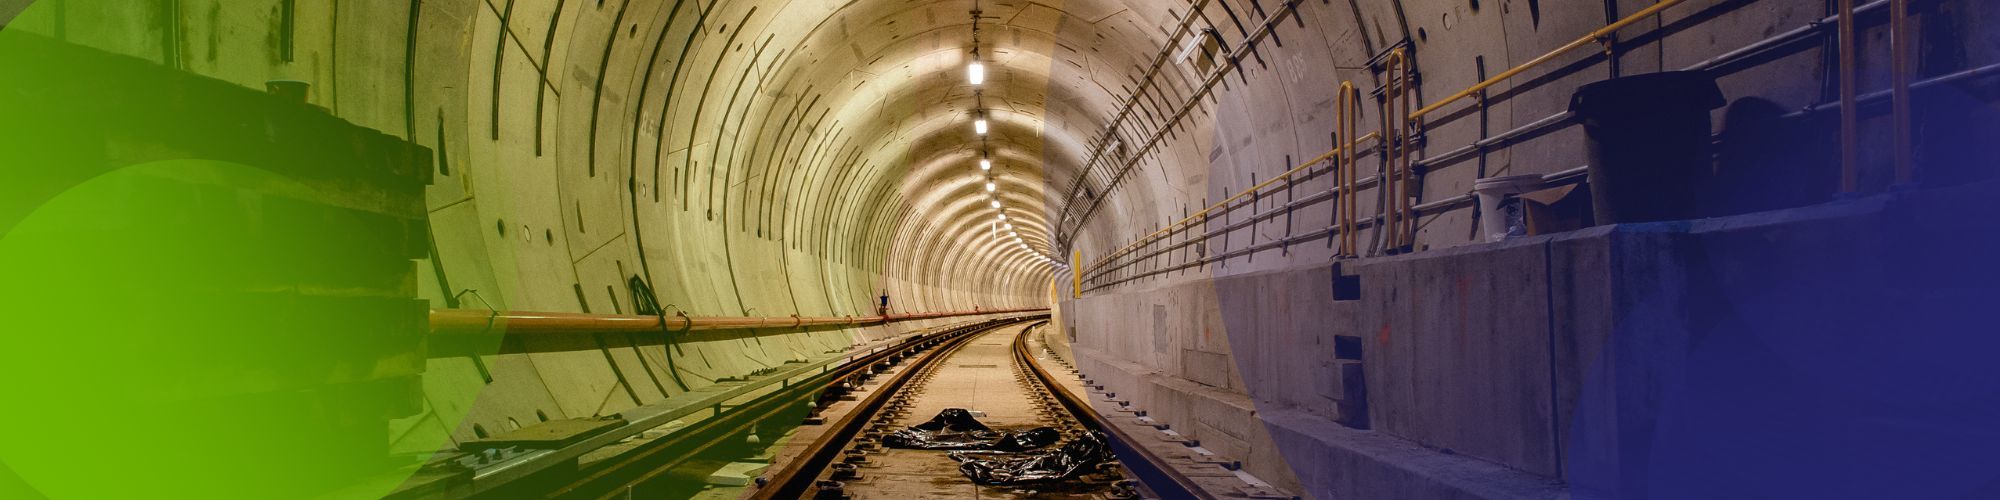 Network Rail begins installation of 11,000-tonne Tunnel on East Coast Main Line to Improve Efficiency and Reliability